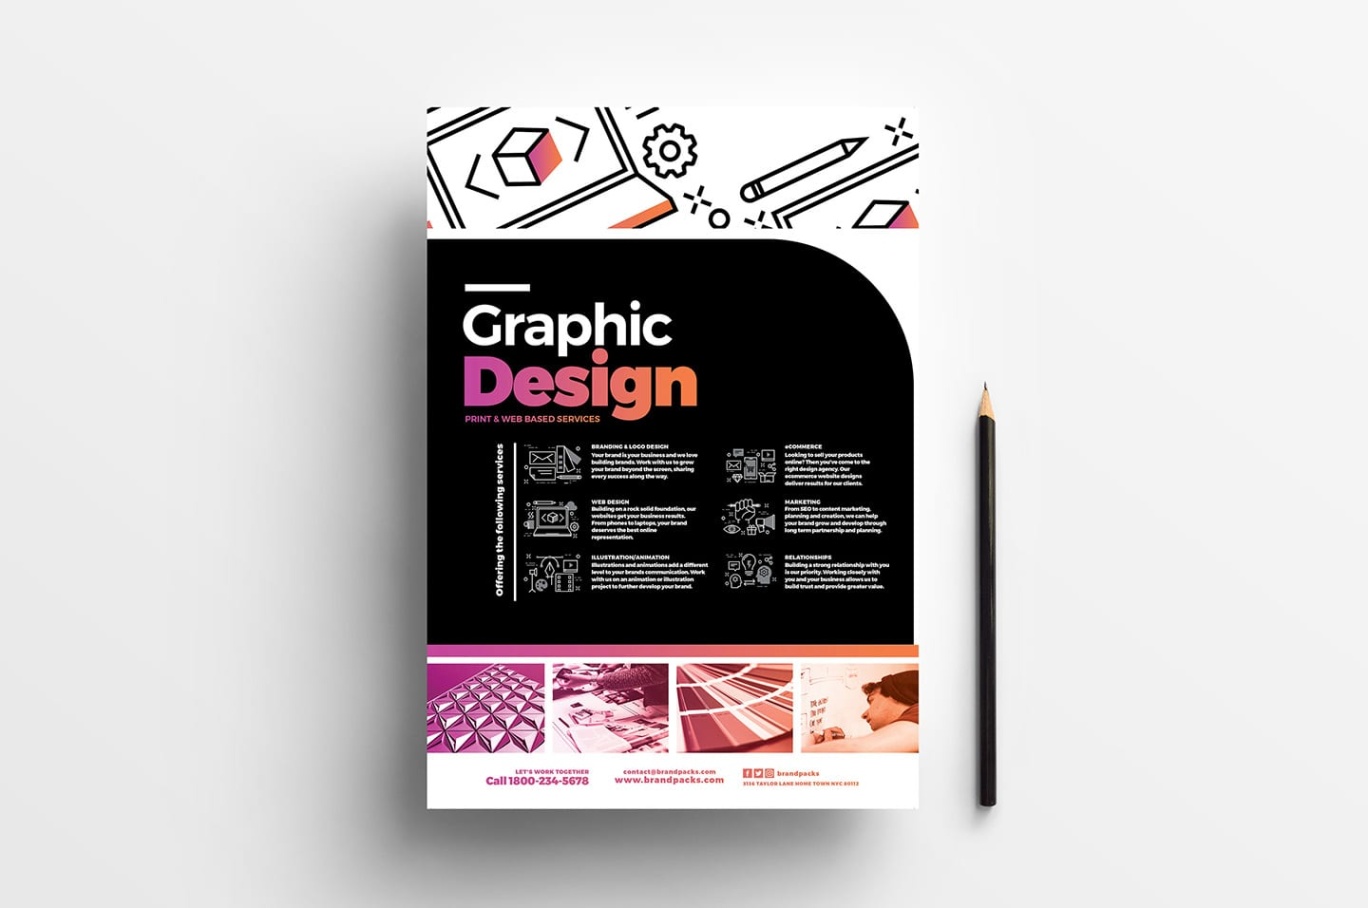 Get Creative With Ready-to-Use Graphic Design Templates!